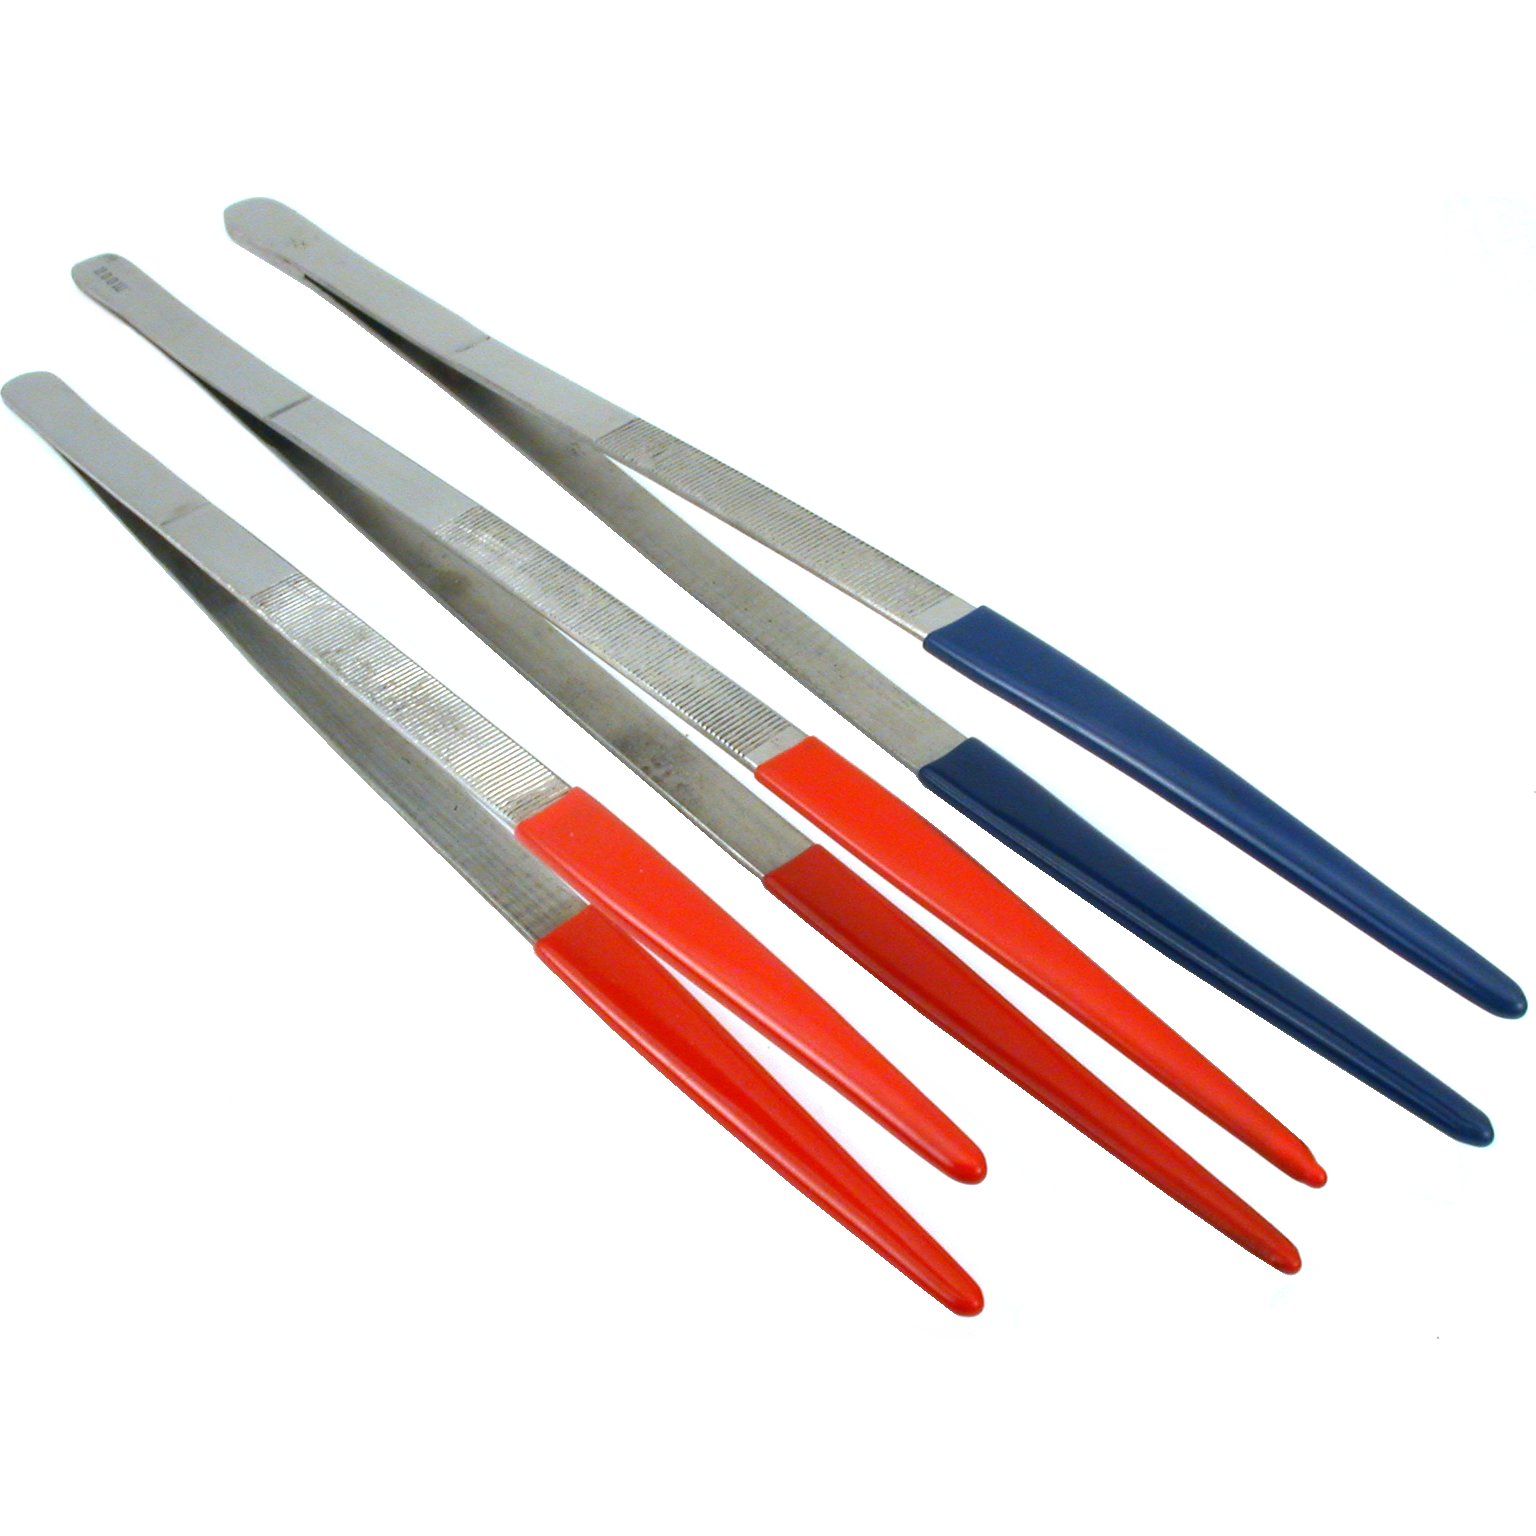 3 Long Tweezers Jewelers Cleaning Sewing Hand Tools